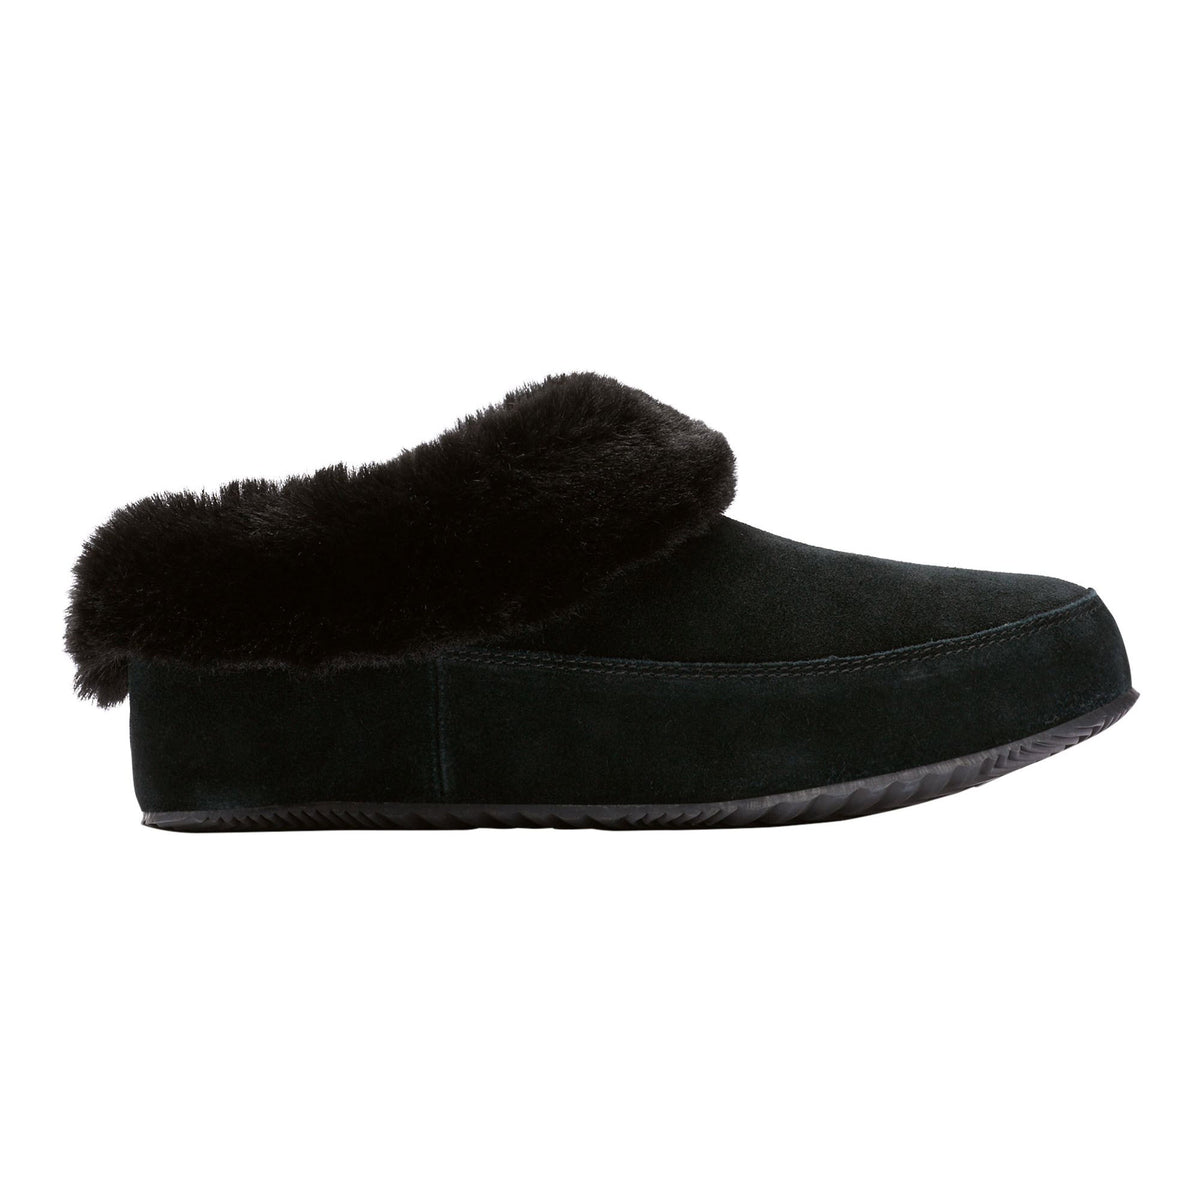 A single SOREL GO COFFEE RUN BLACK - WOMENS slipper with a luxuriously soft furry lining and trim, isolated on a white background.